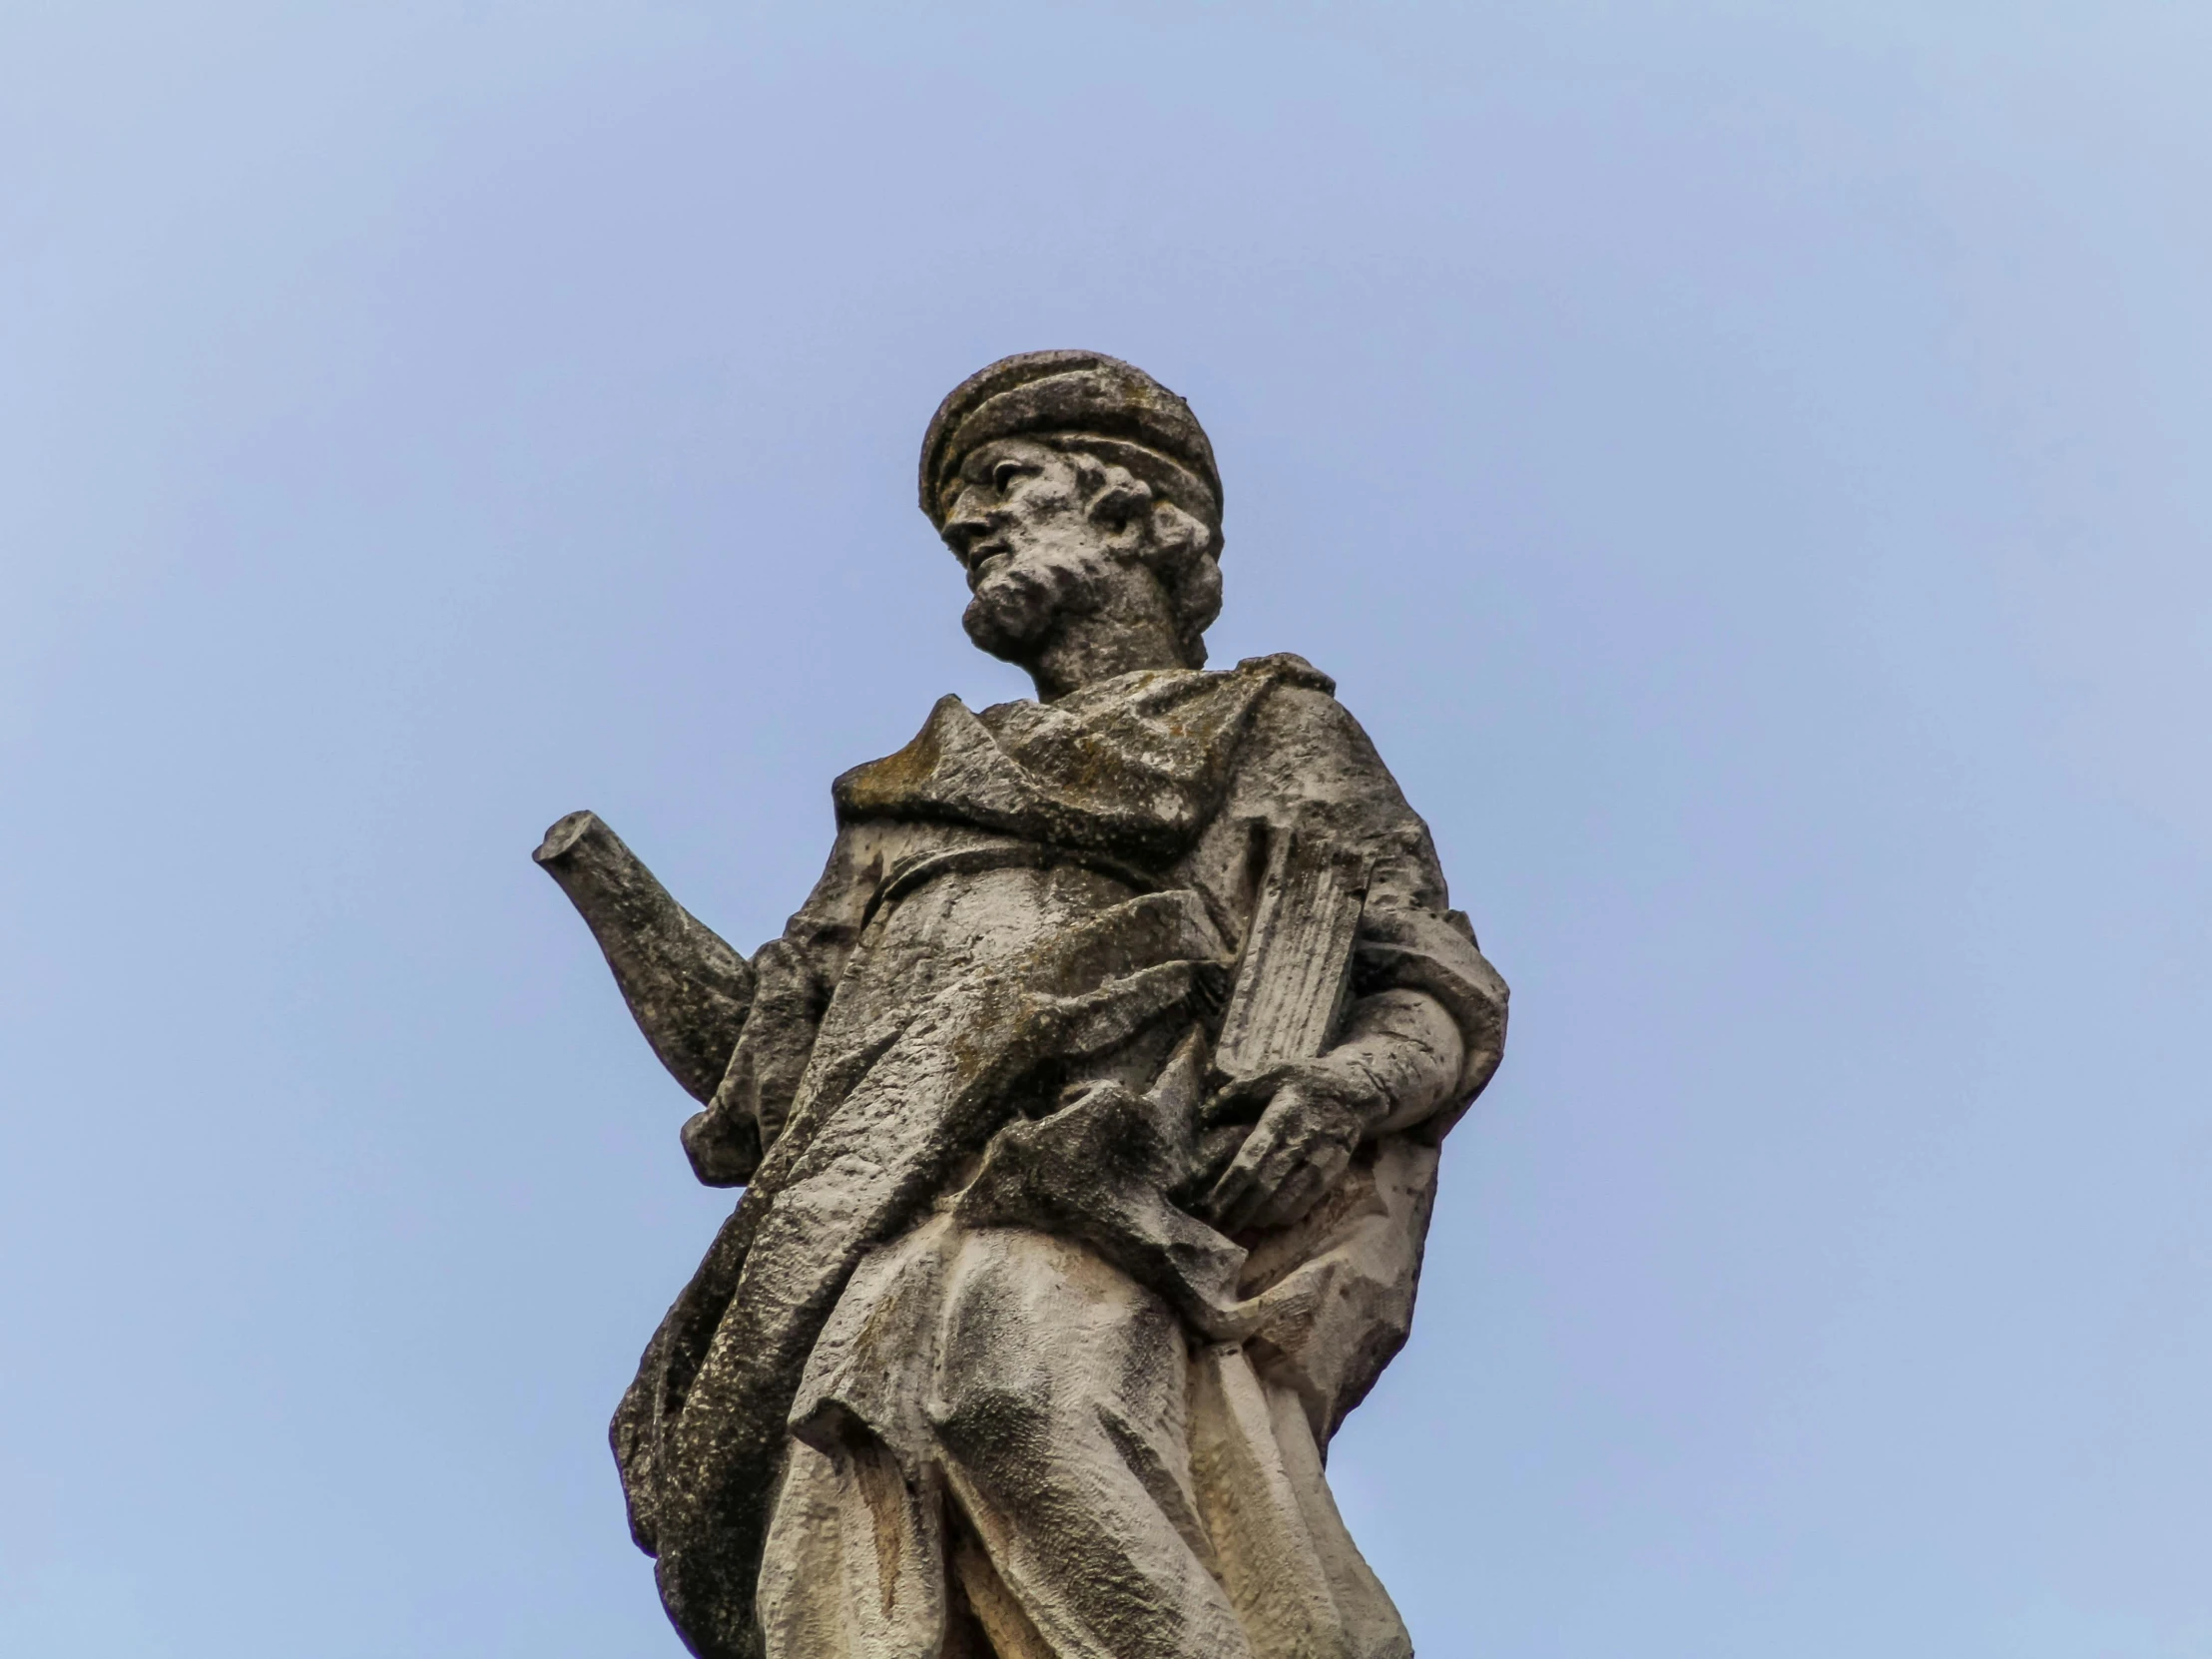 a statue of a man holding a book, a statue, inspired by Jacopo de' Barbari, unsplash, mannerism, lviv, donatello, looking upwards, sqare-jawed in medieval clothing